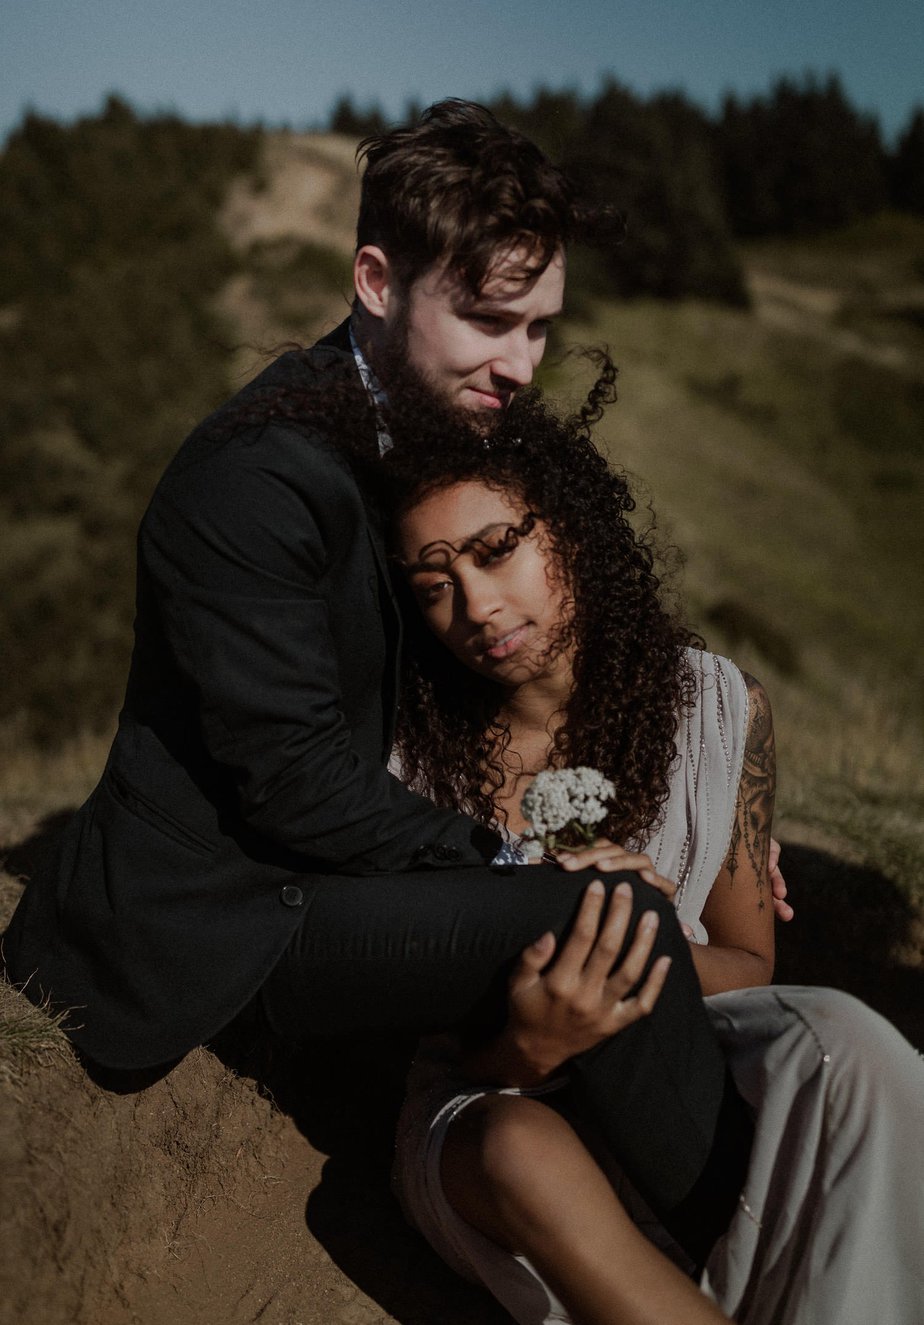 Bride leans into her groom as he warms her from the coastal winds. Her hair blows in her face. This God's thumb elopement was so wonderful and intimate with just the couple and their Oregon elopement photographer